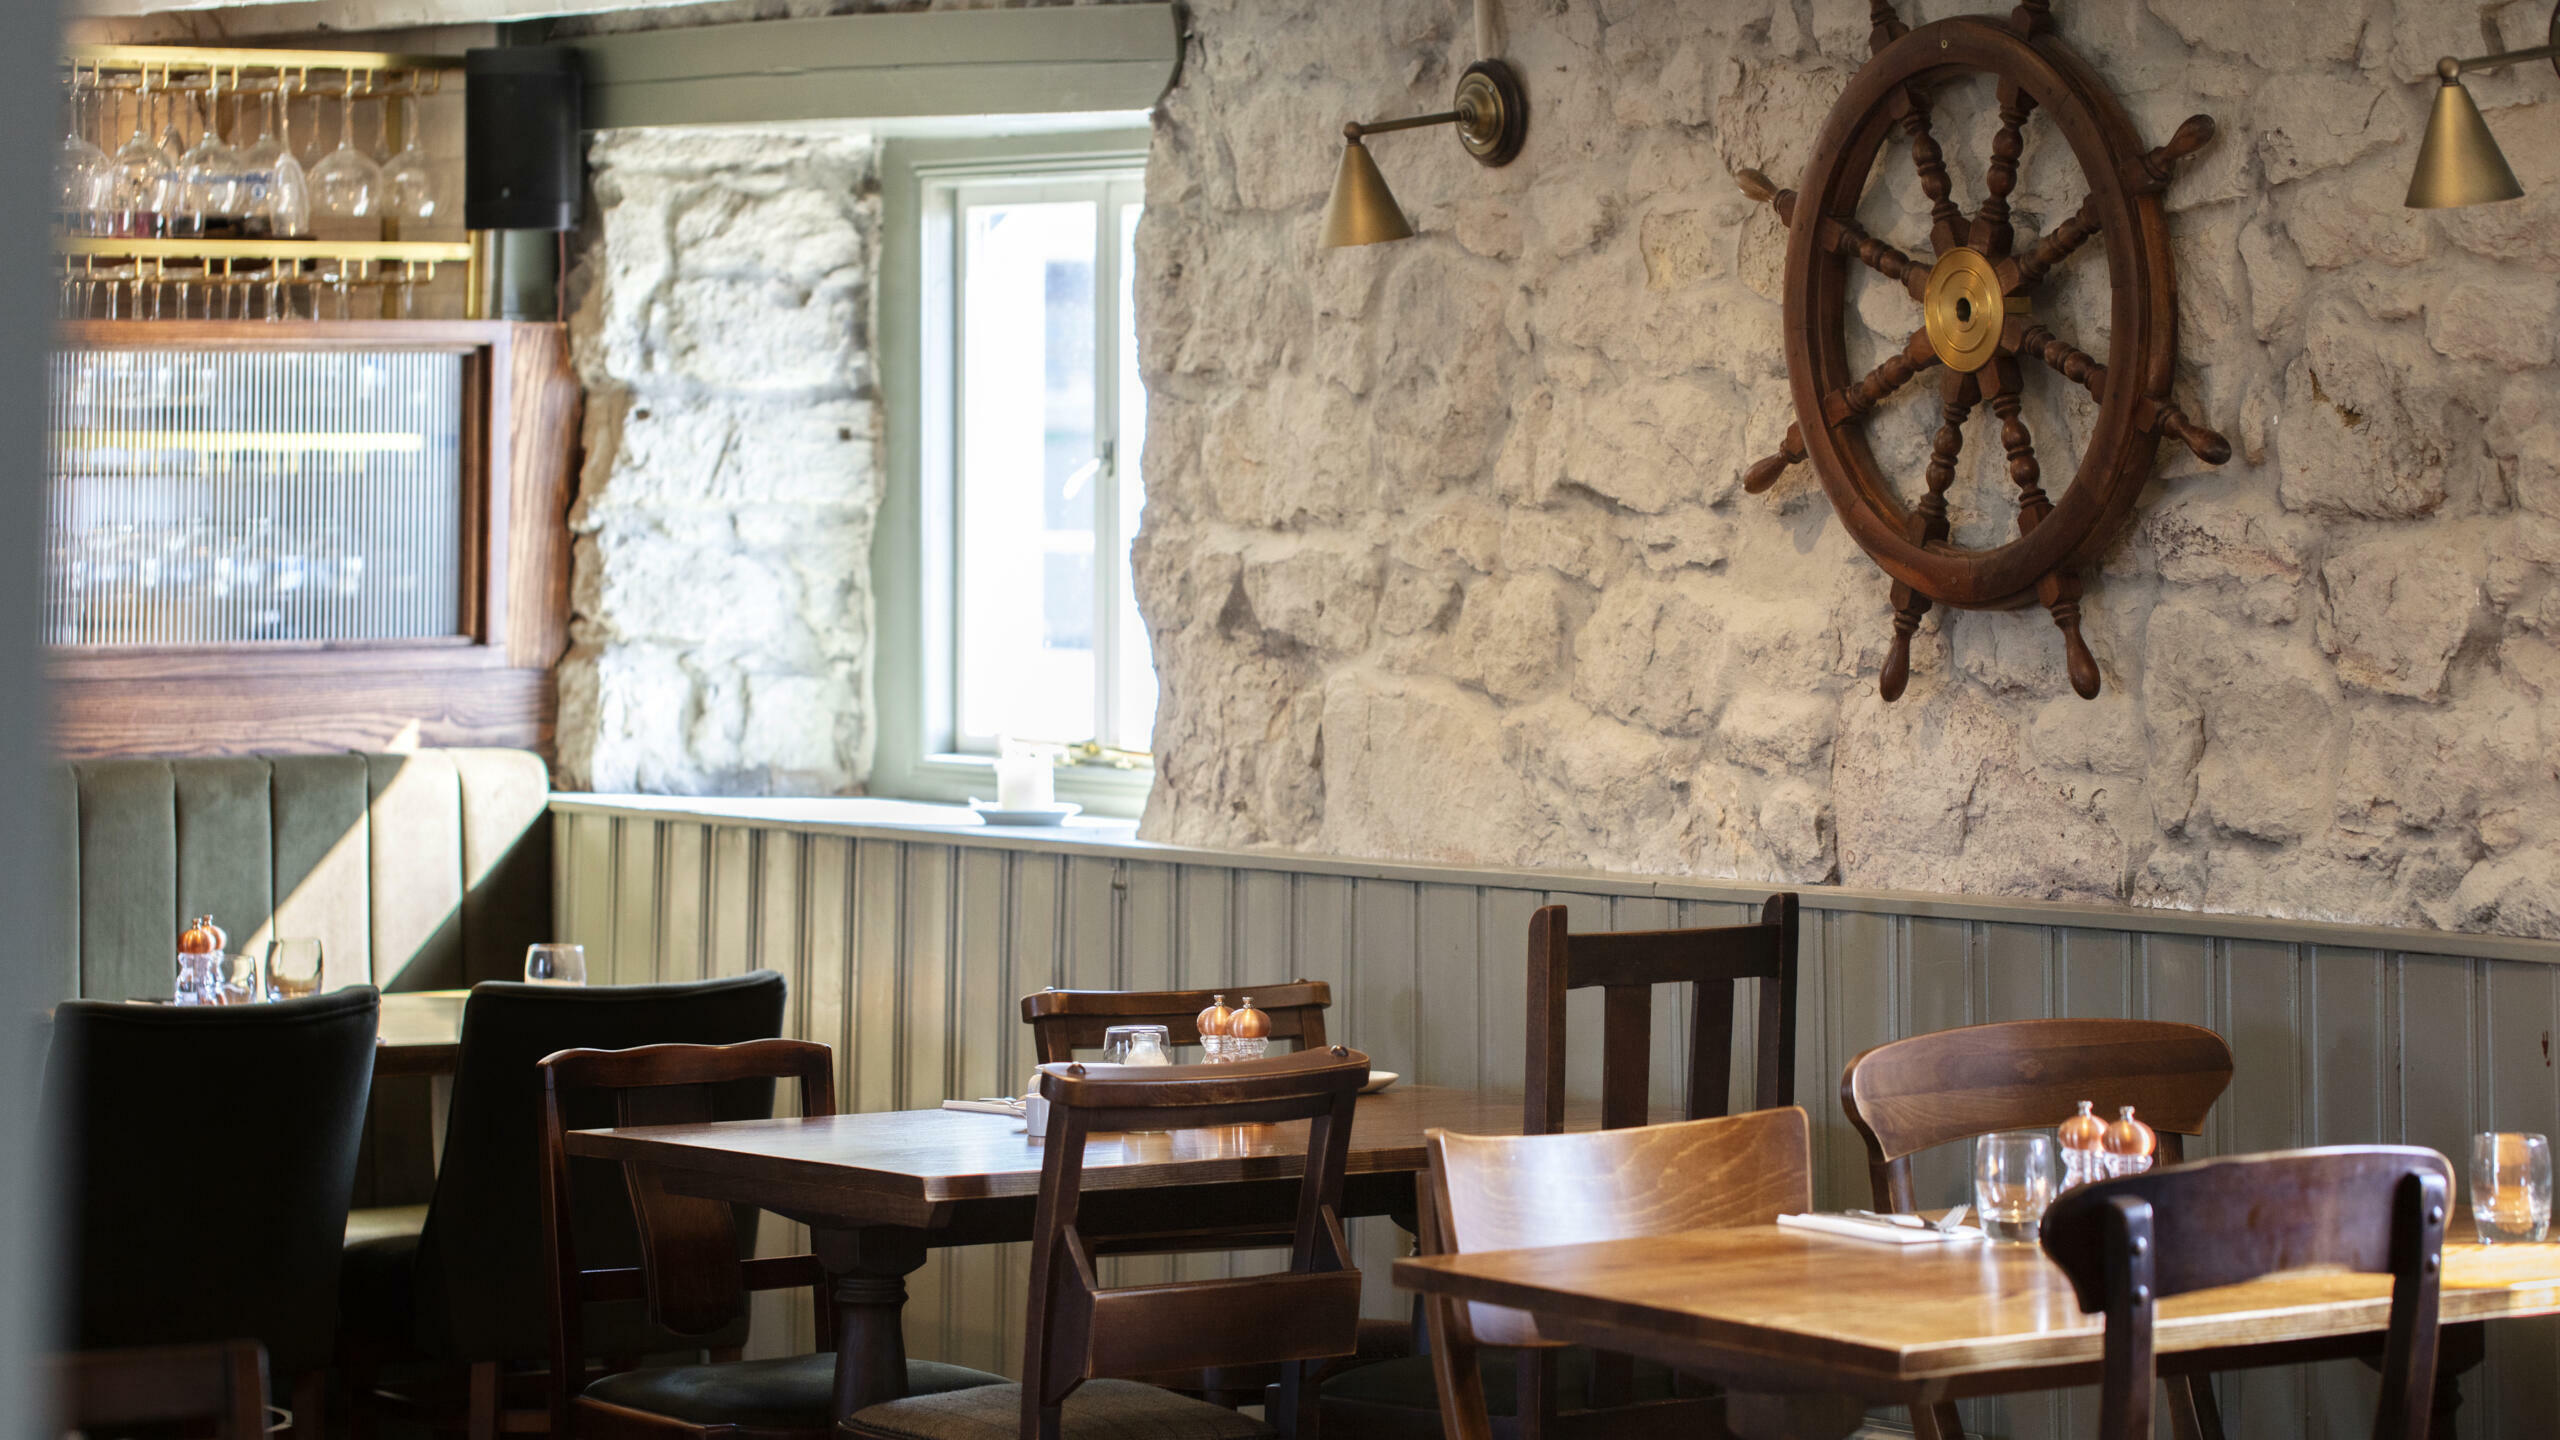 Enjoy a delicious Father's Day meal at The Crusoe, Lower Largo, Fife